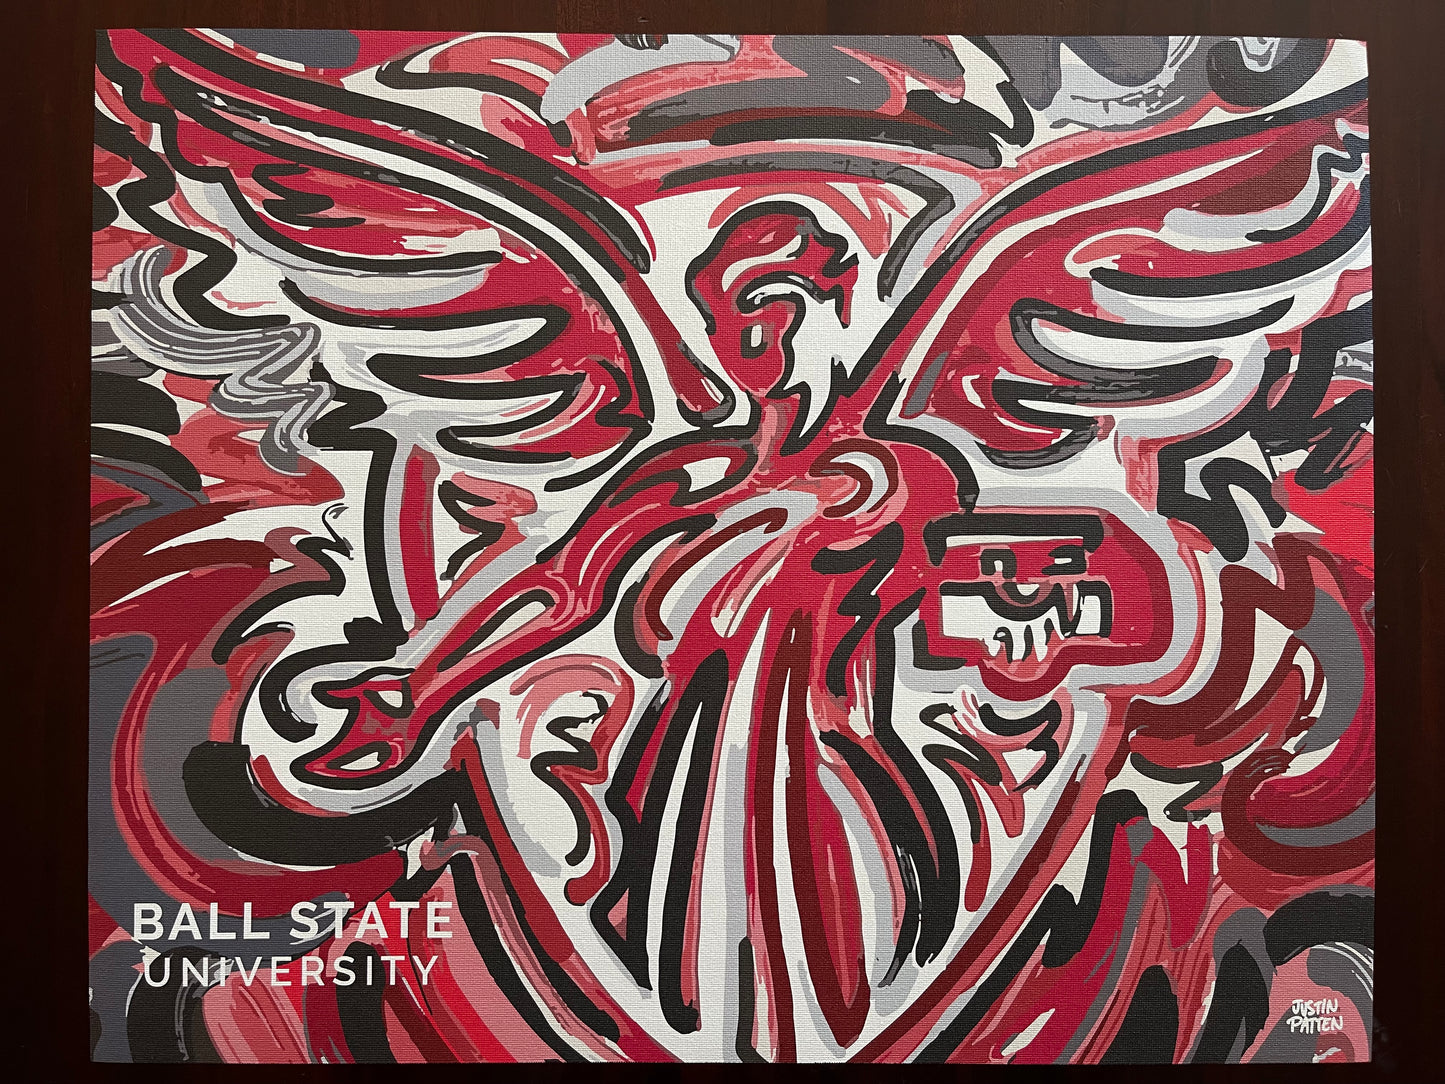 Ball State University Beneficence Statue 20" x 16" Print by Justin Patten